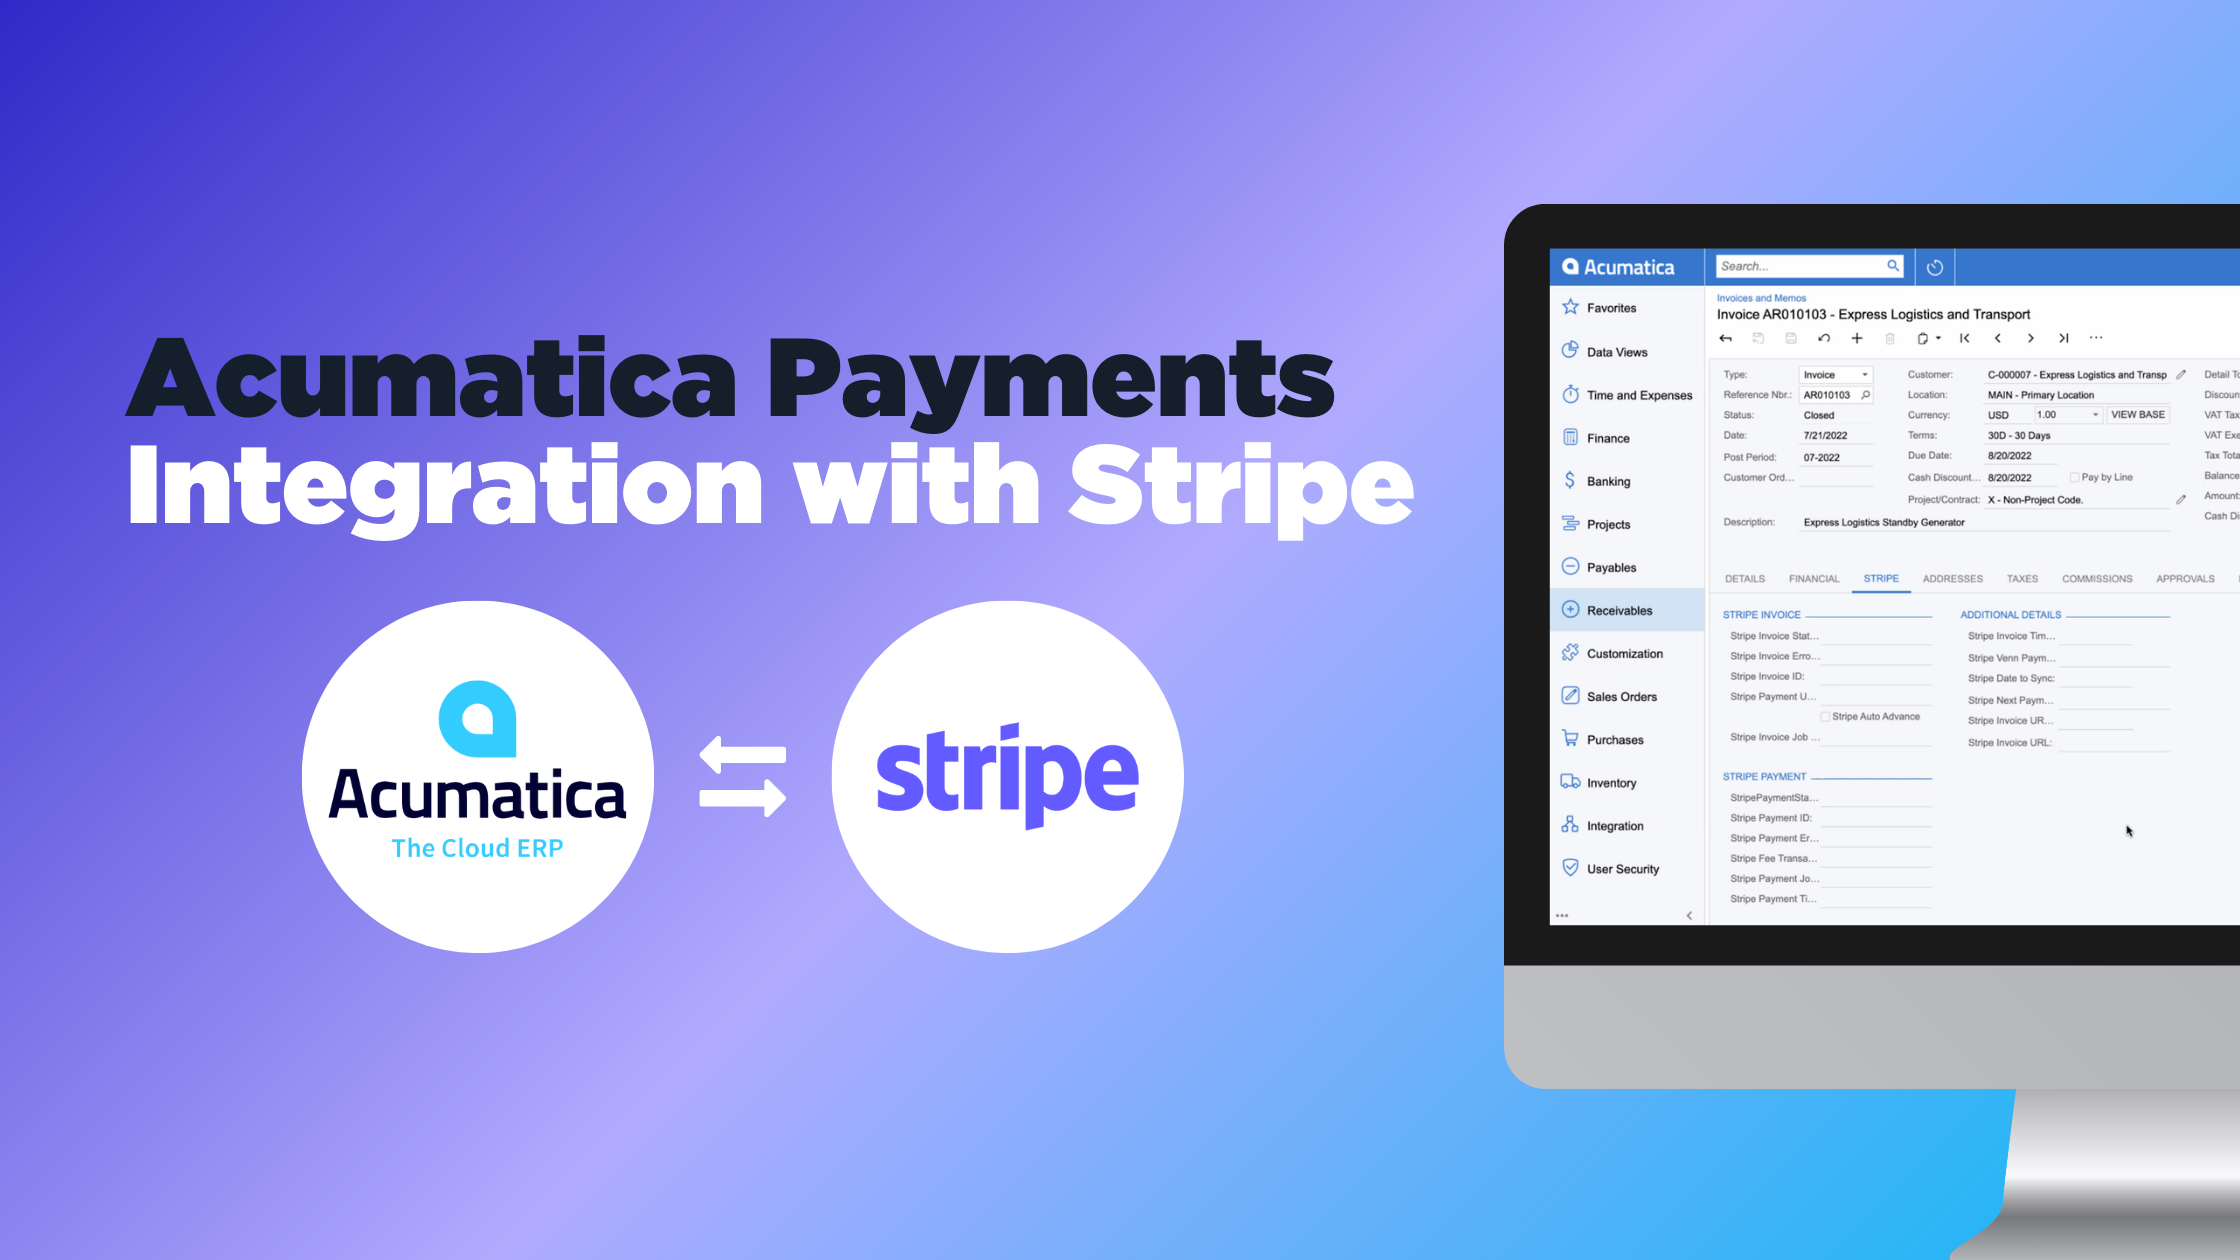 Acumatica Payments Integration with Stripe